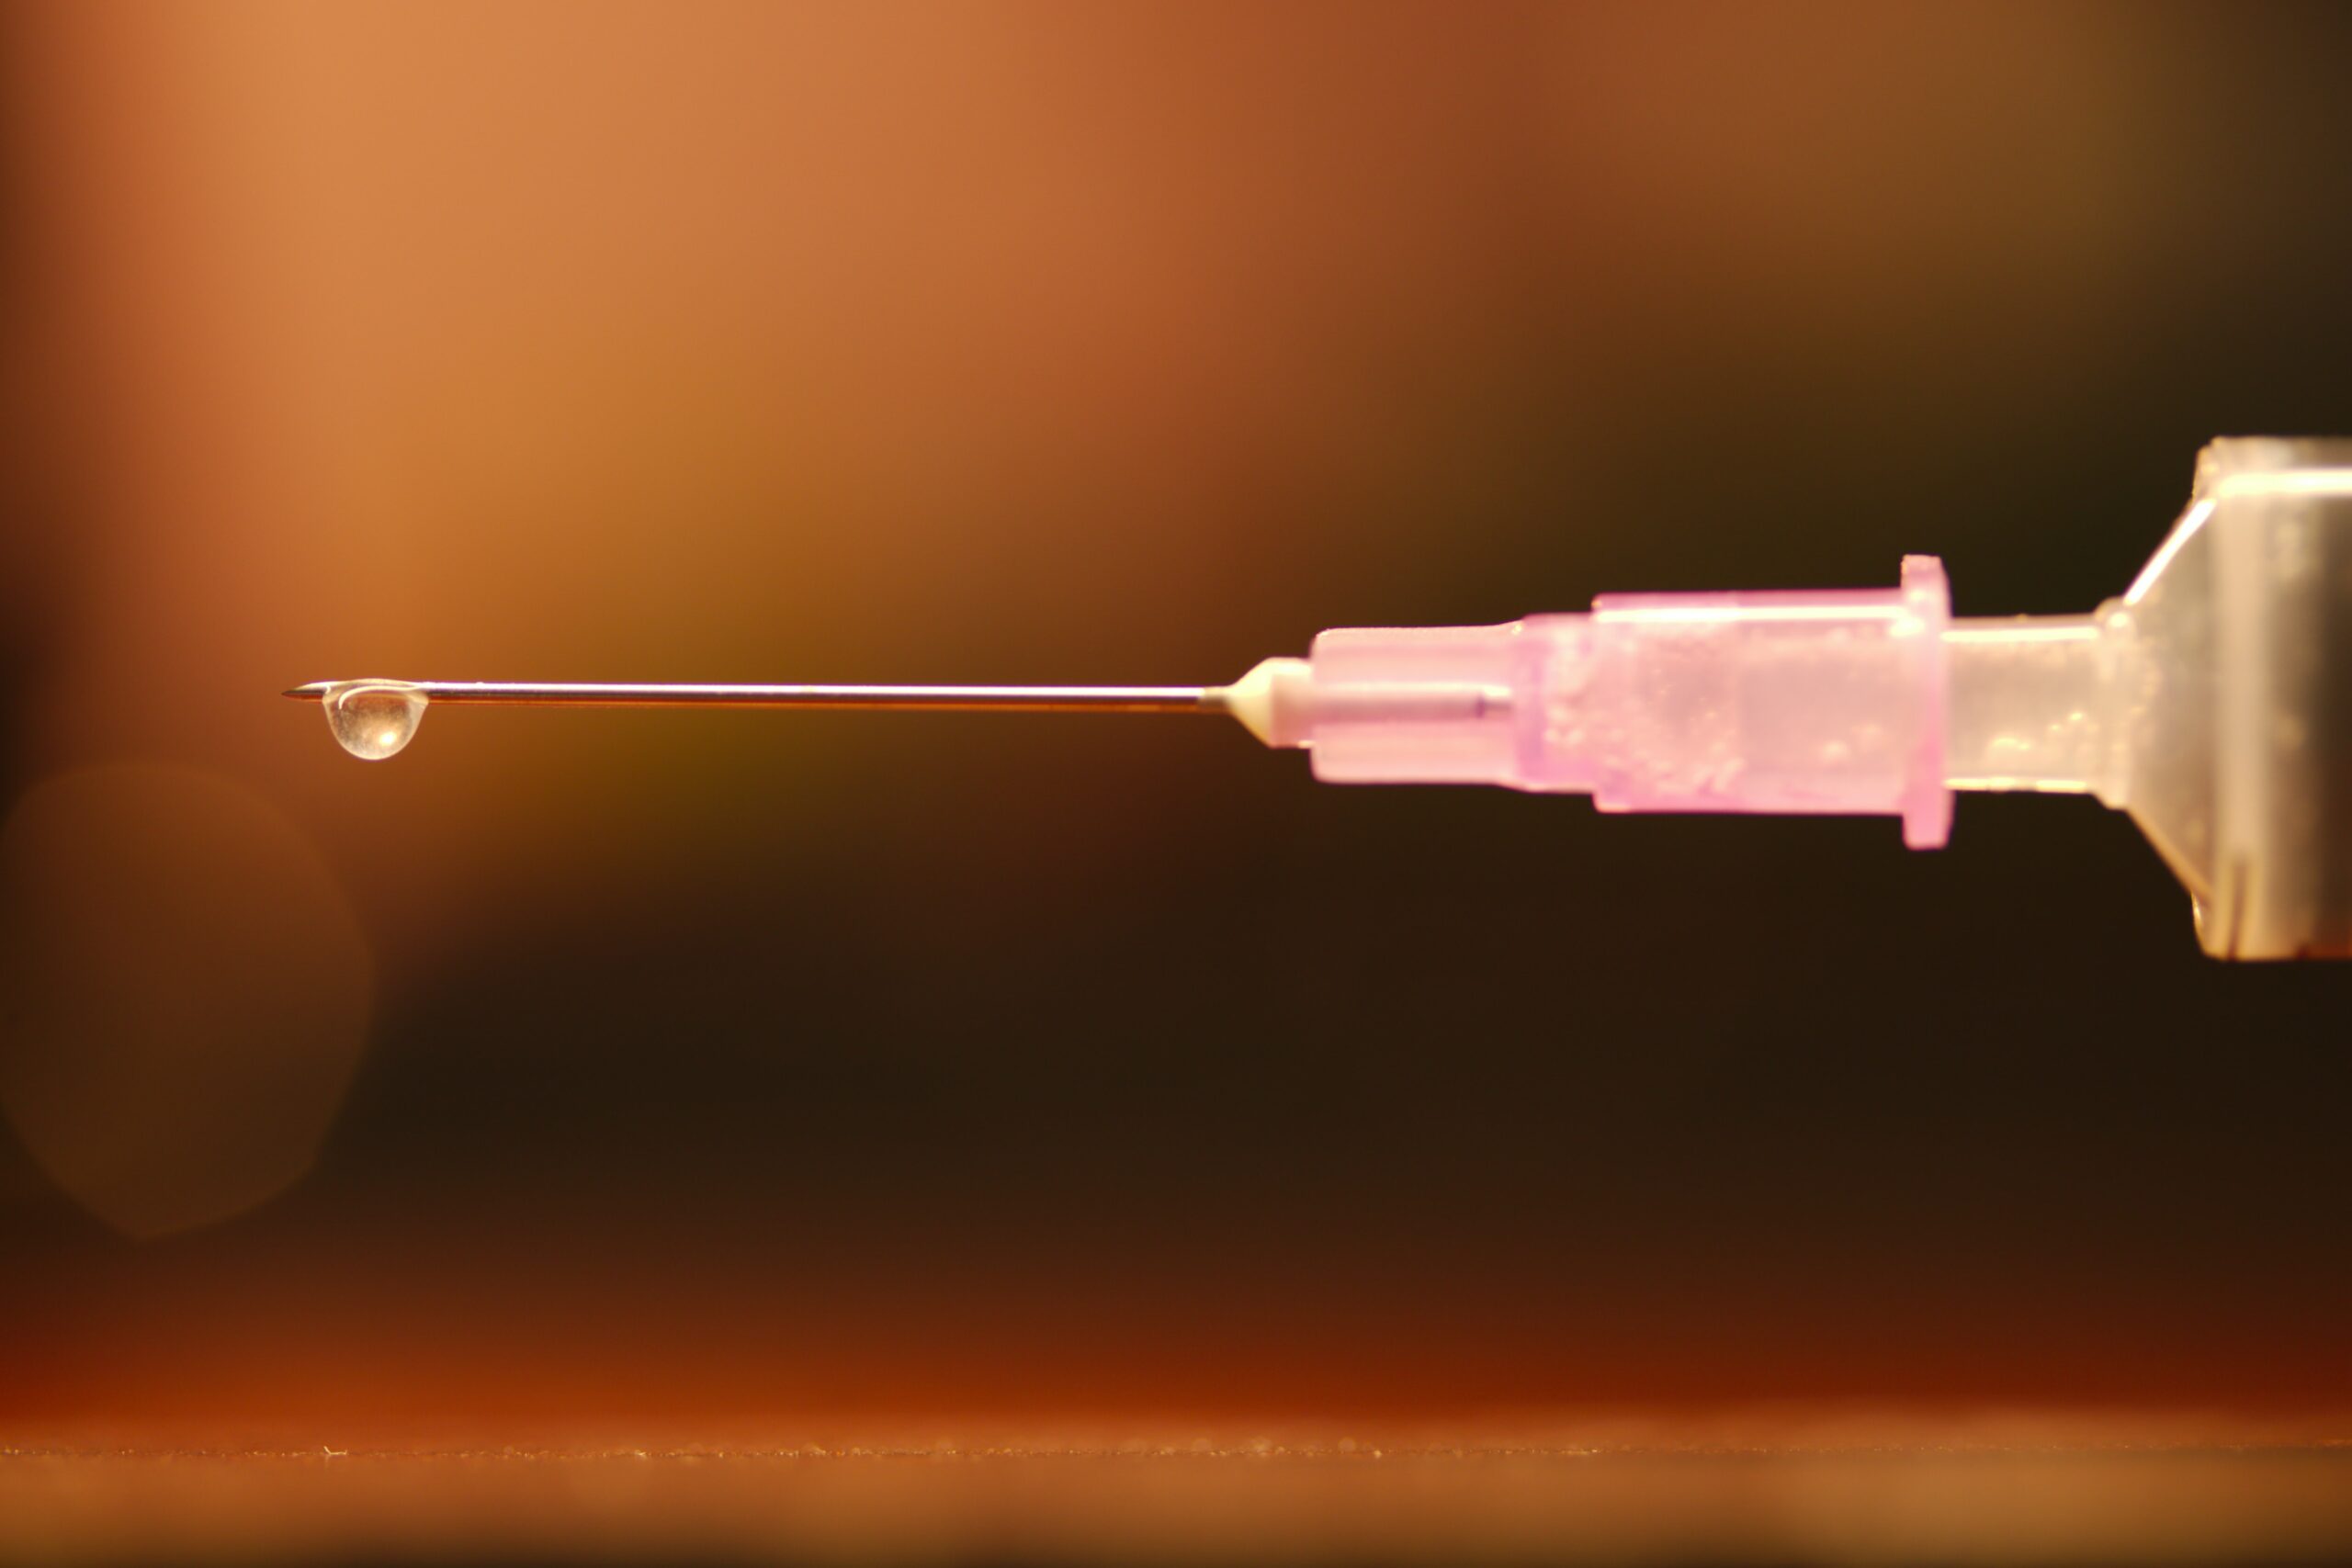 Needle with drop of liquid substance coming out